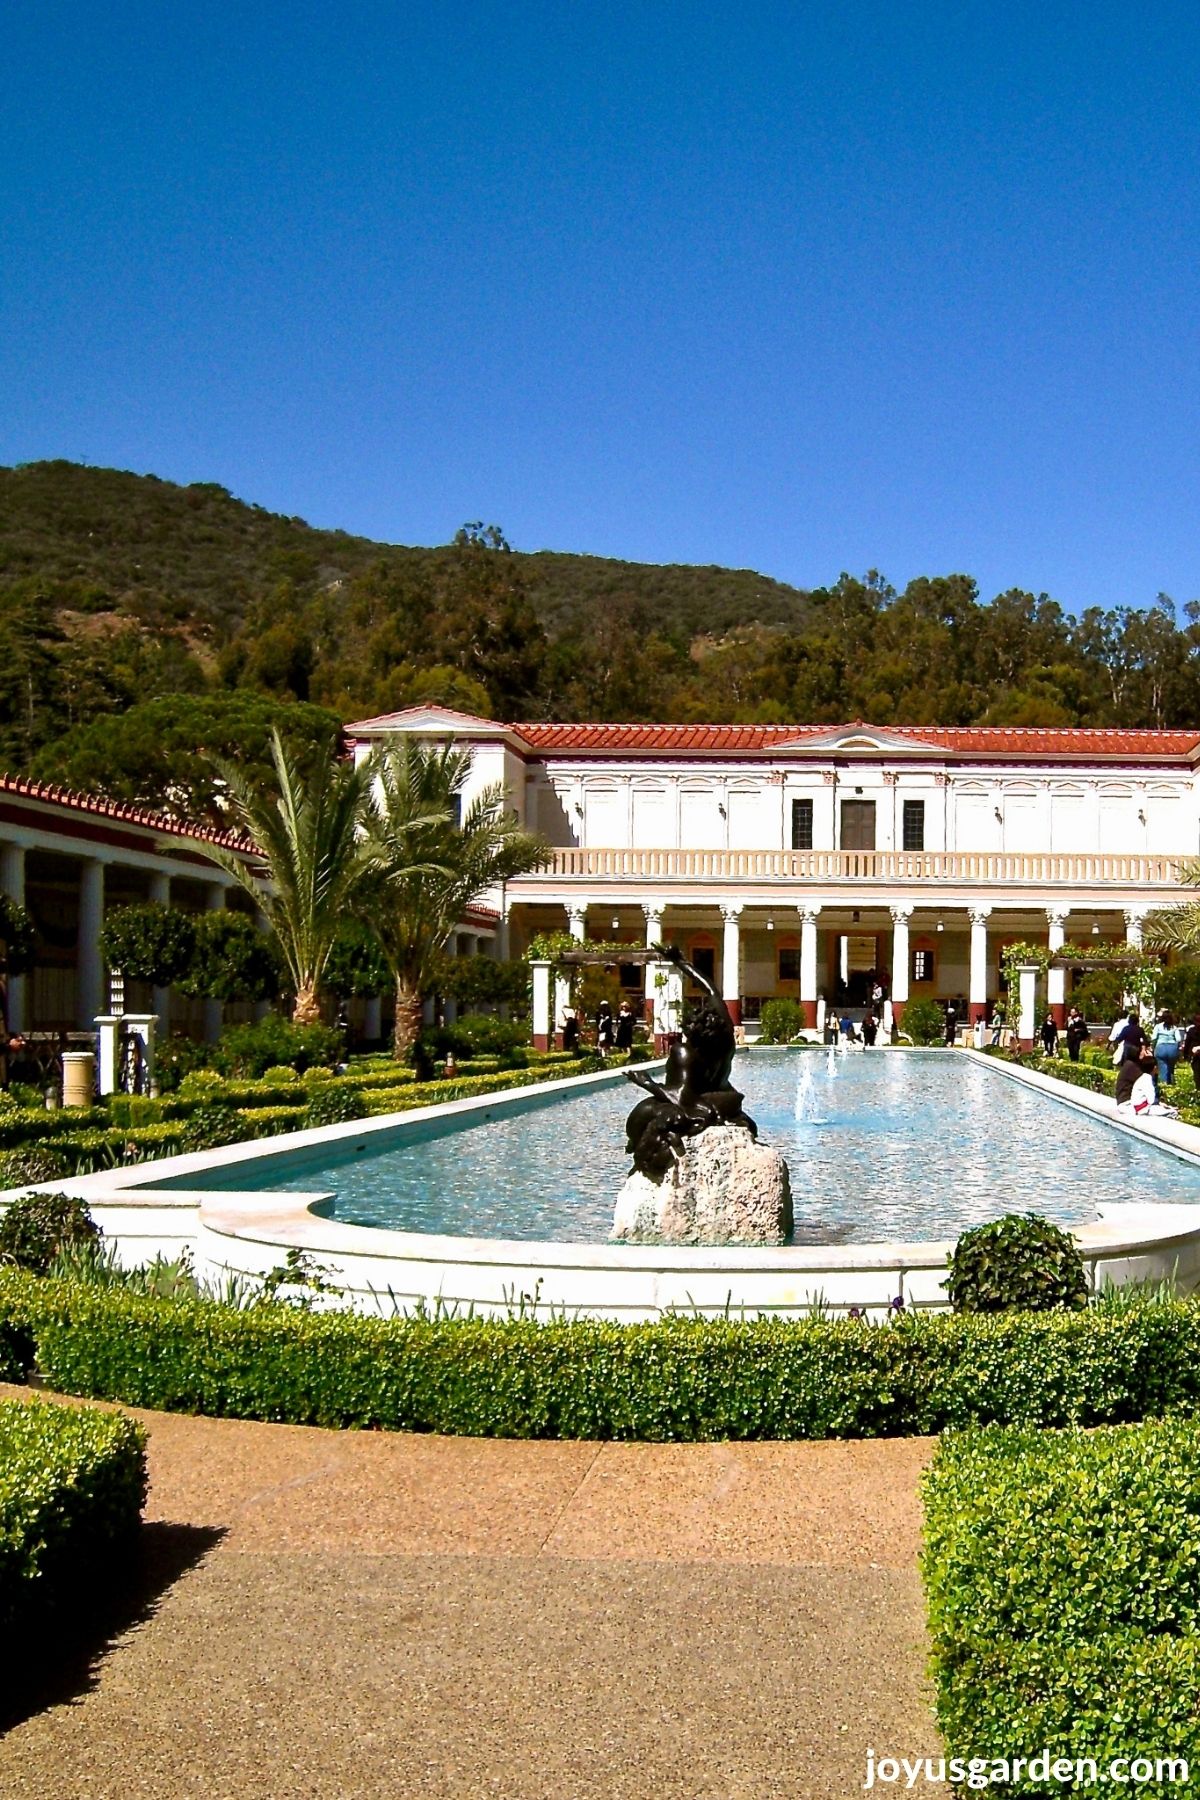 the reflecting pool at the Getty Villa